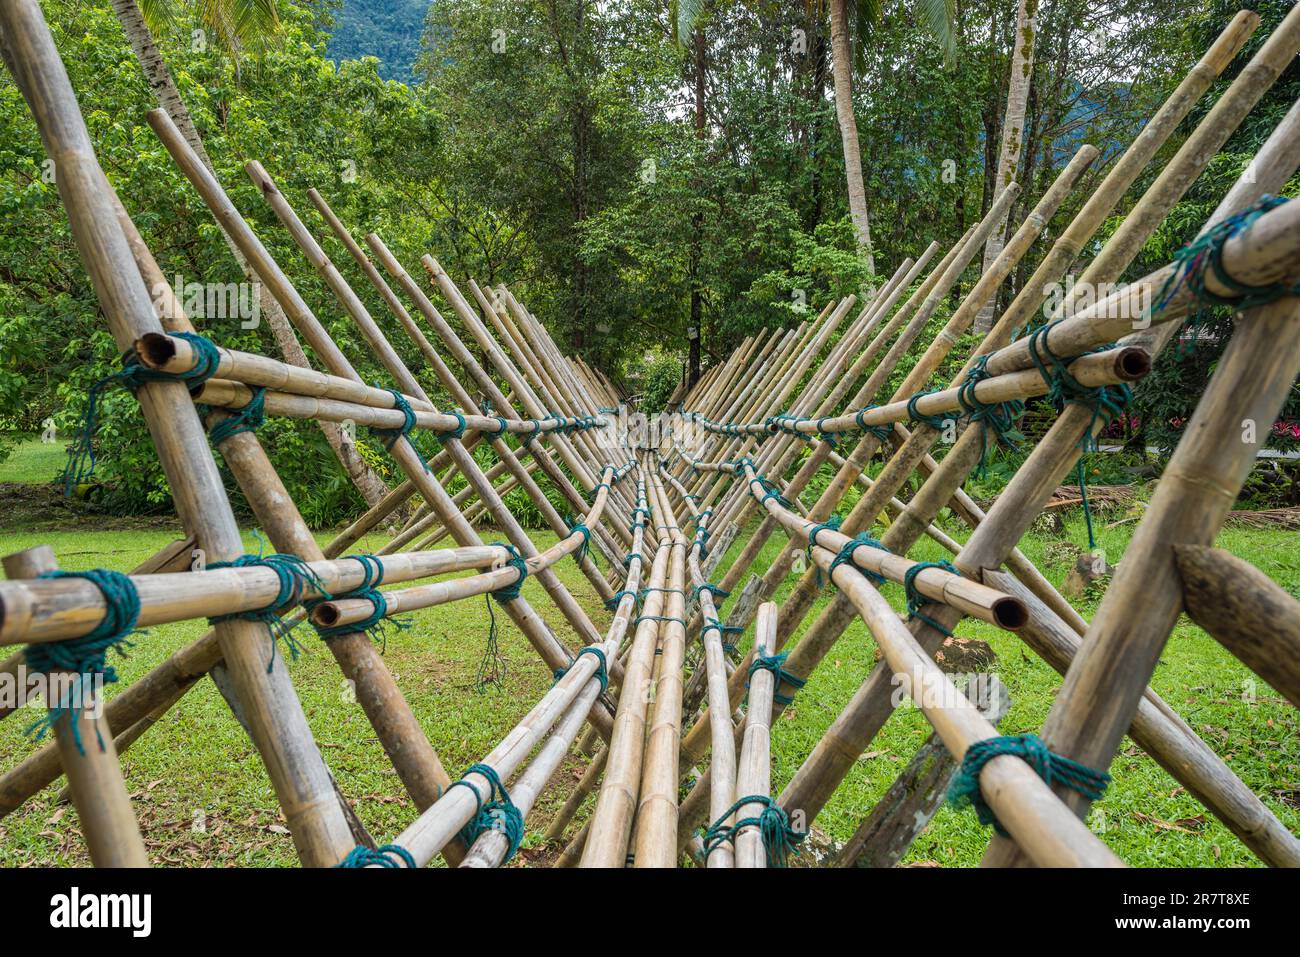 The Bidayuh tribe living in Sarawak on Borneo have mastered the art of building bamboo bridges. Here to see in Santubong in the Sarawak Cultural Stock Photo